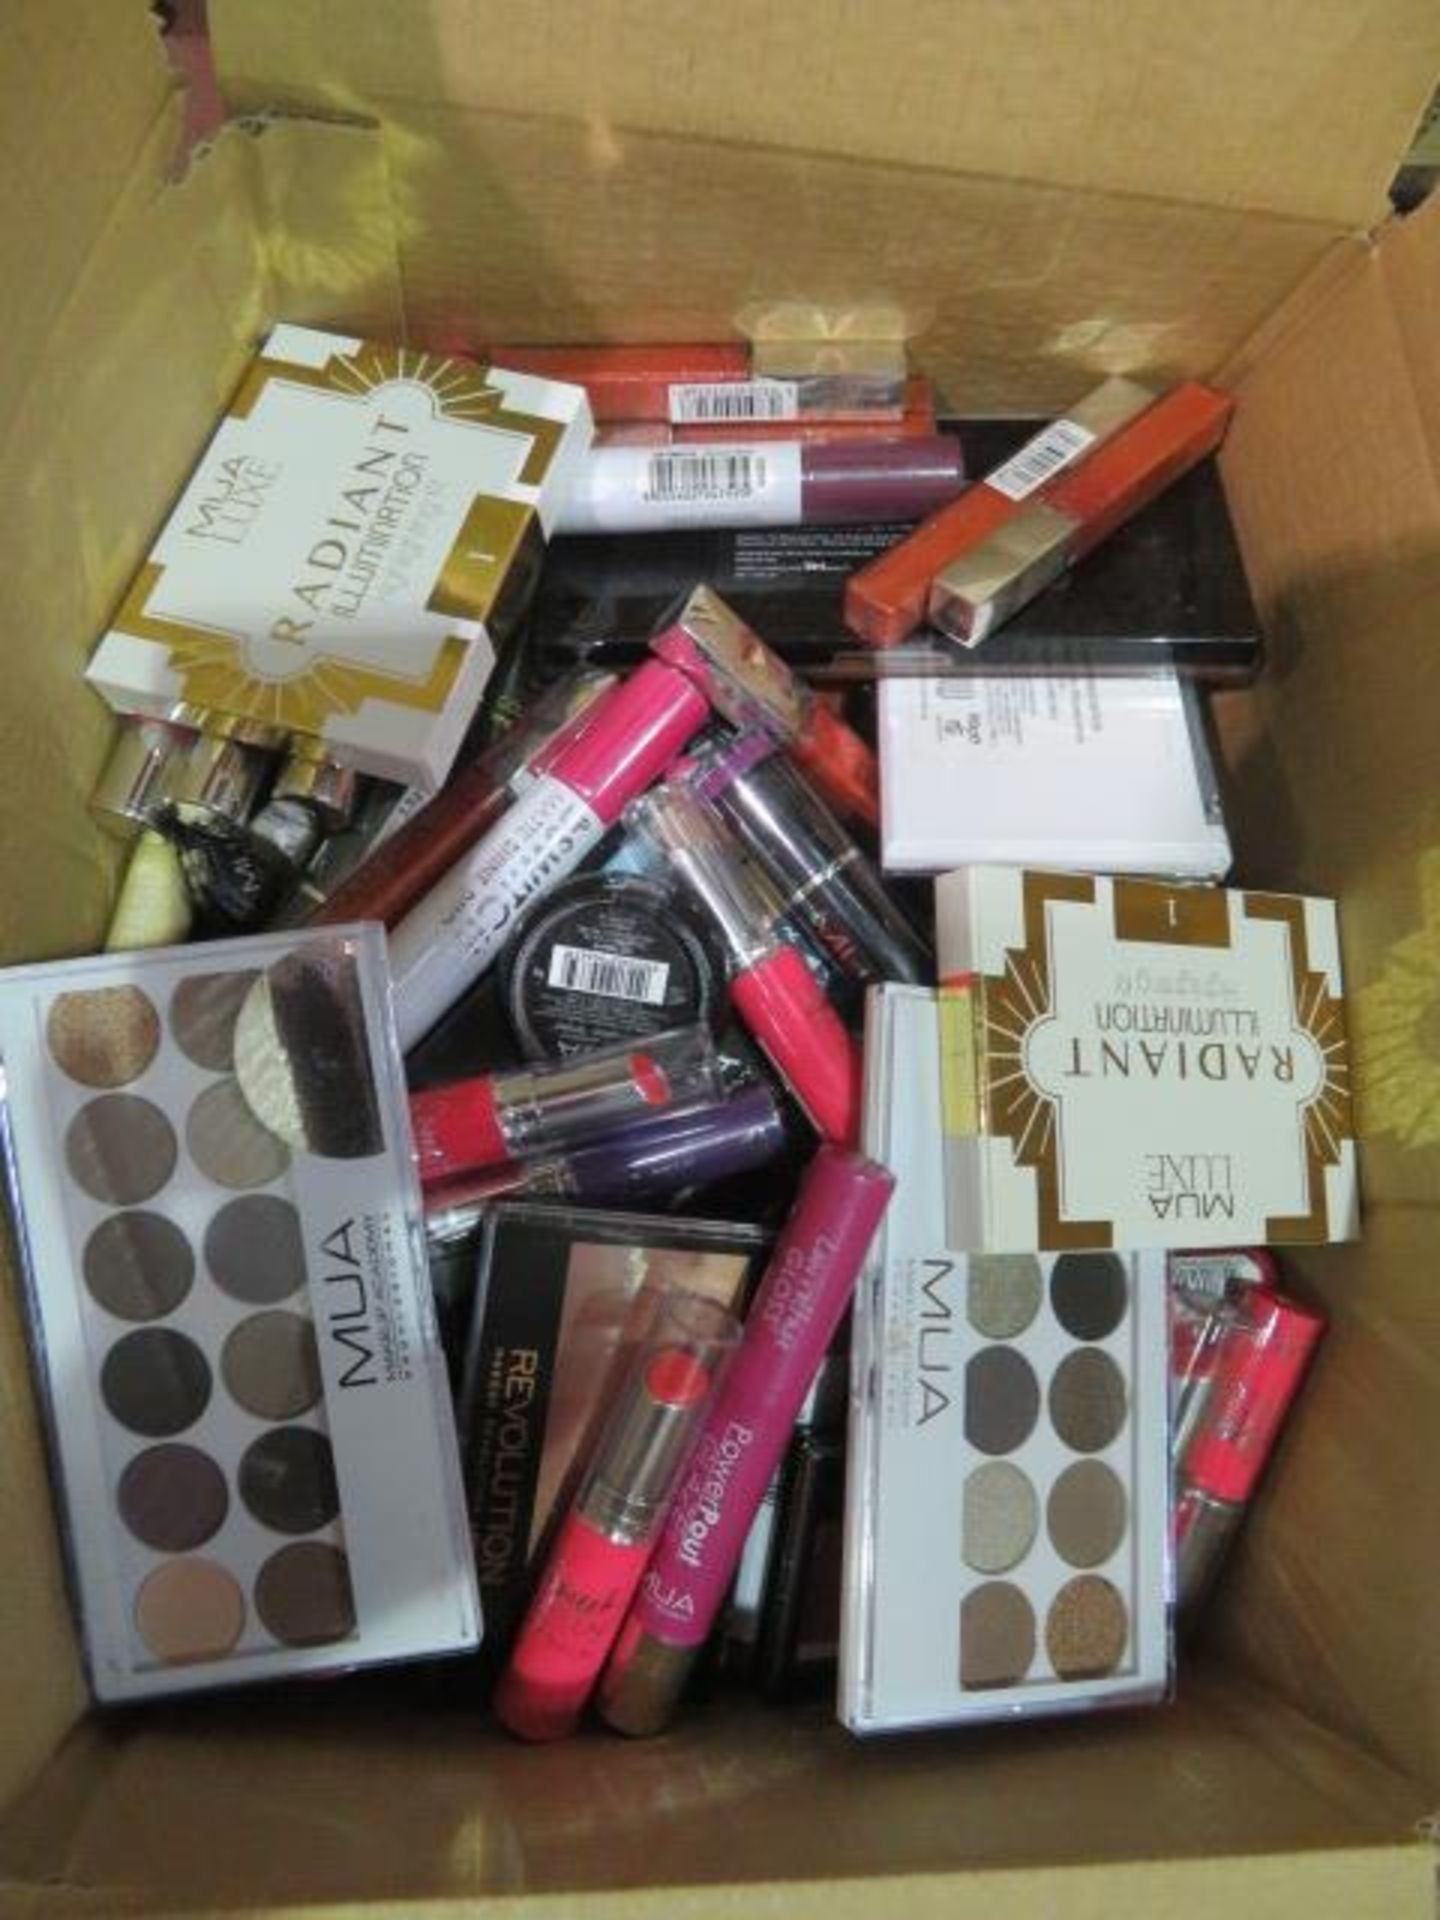 Circa. 200 items of various new make up acadamy make up to include: revolution eye shadow palette,